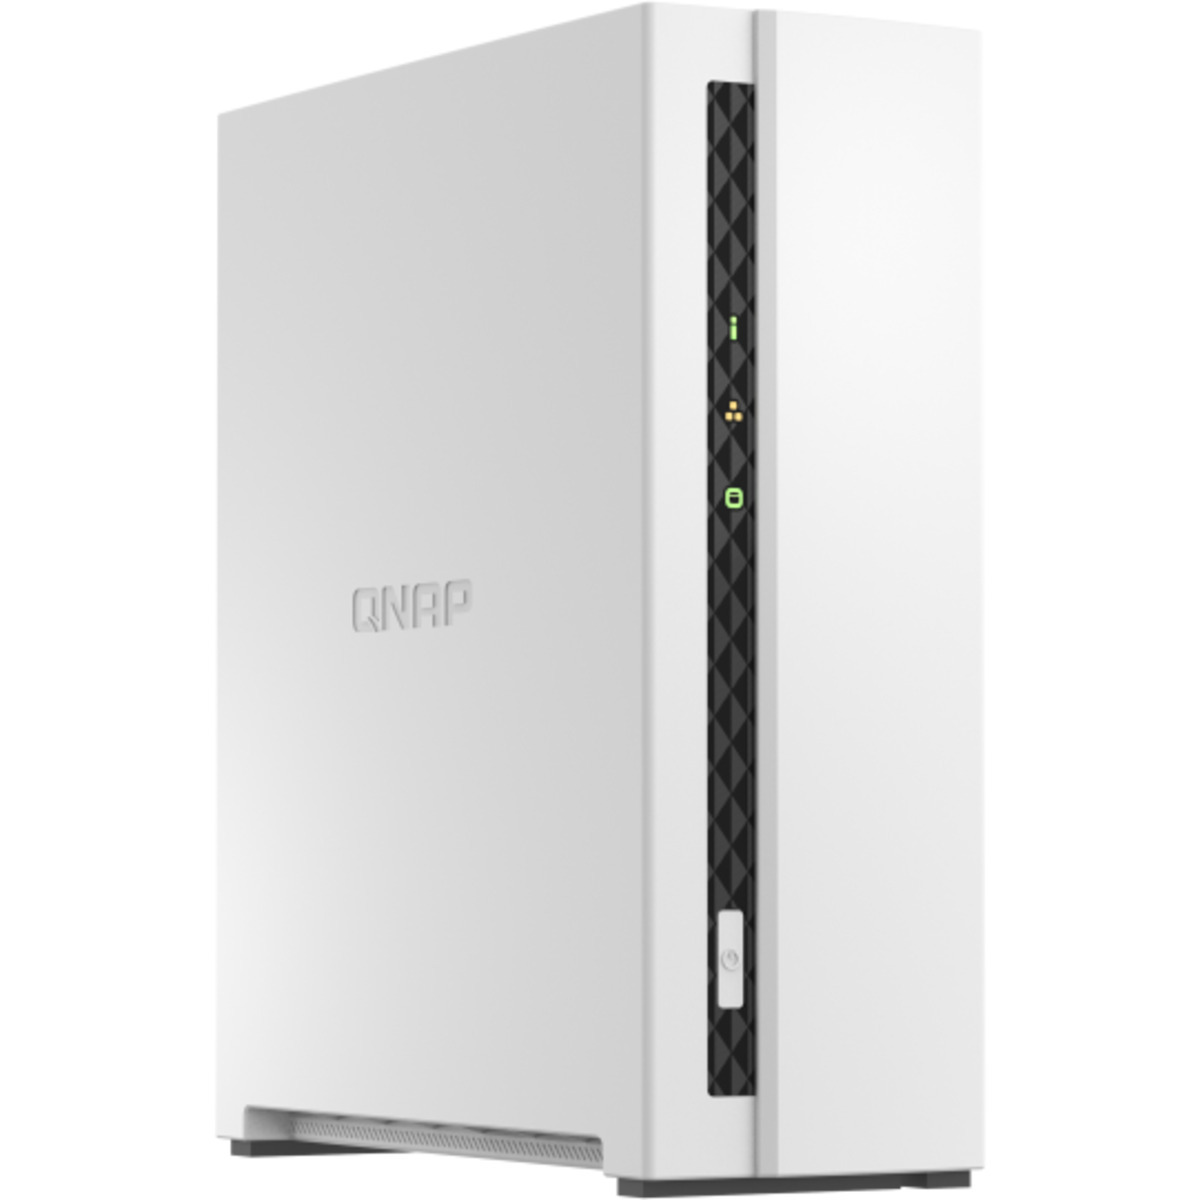 QNAP TS-133 NAS - Network Attached Storage Device Burn-In Tested Configurations